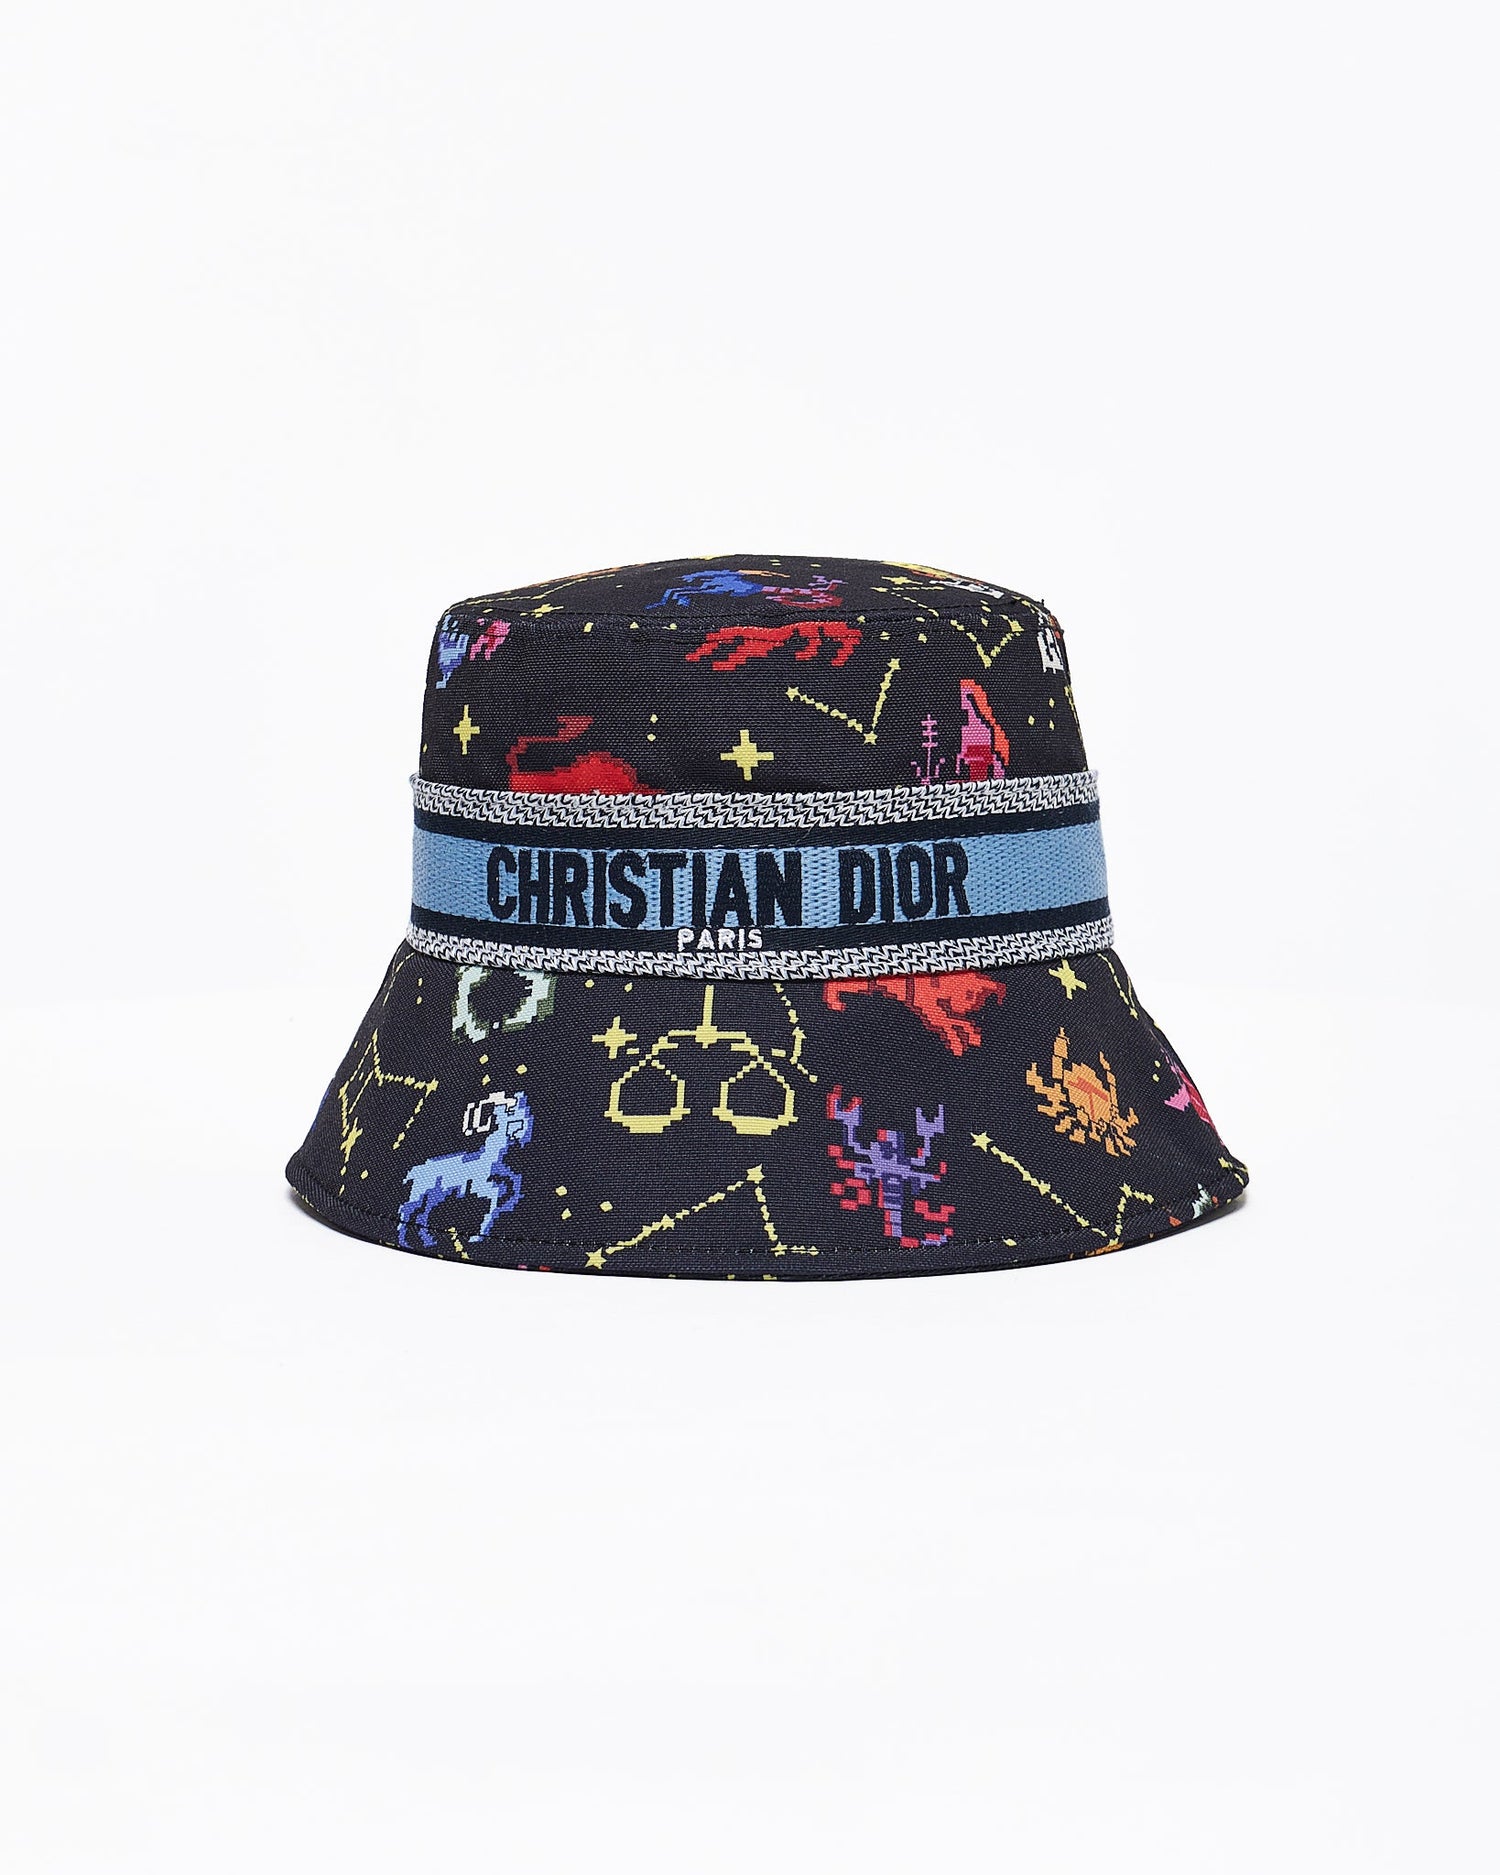 MOI OUTFIT-Cartoon Over Ptinted Bucket Hat 14.90